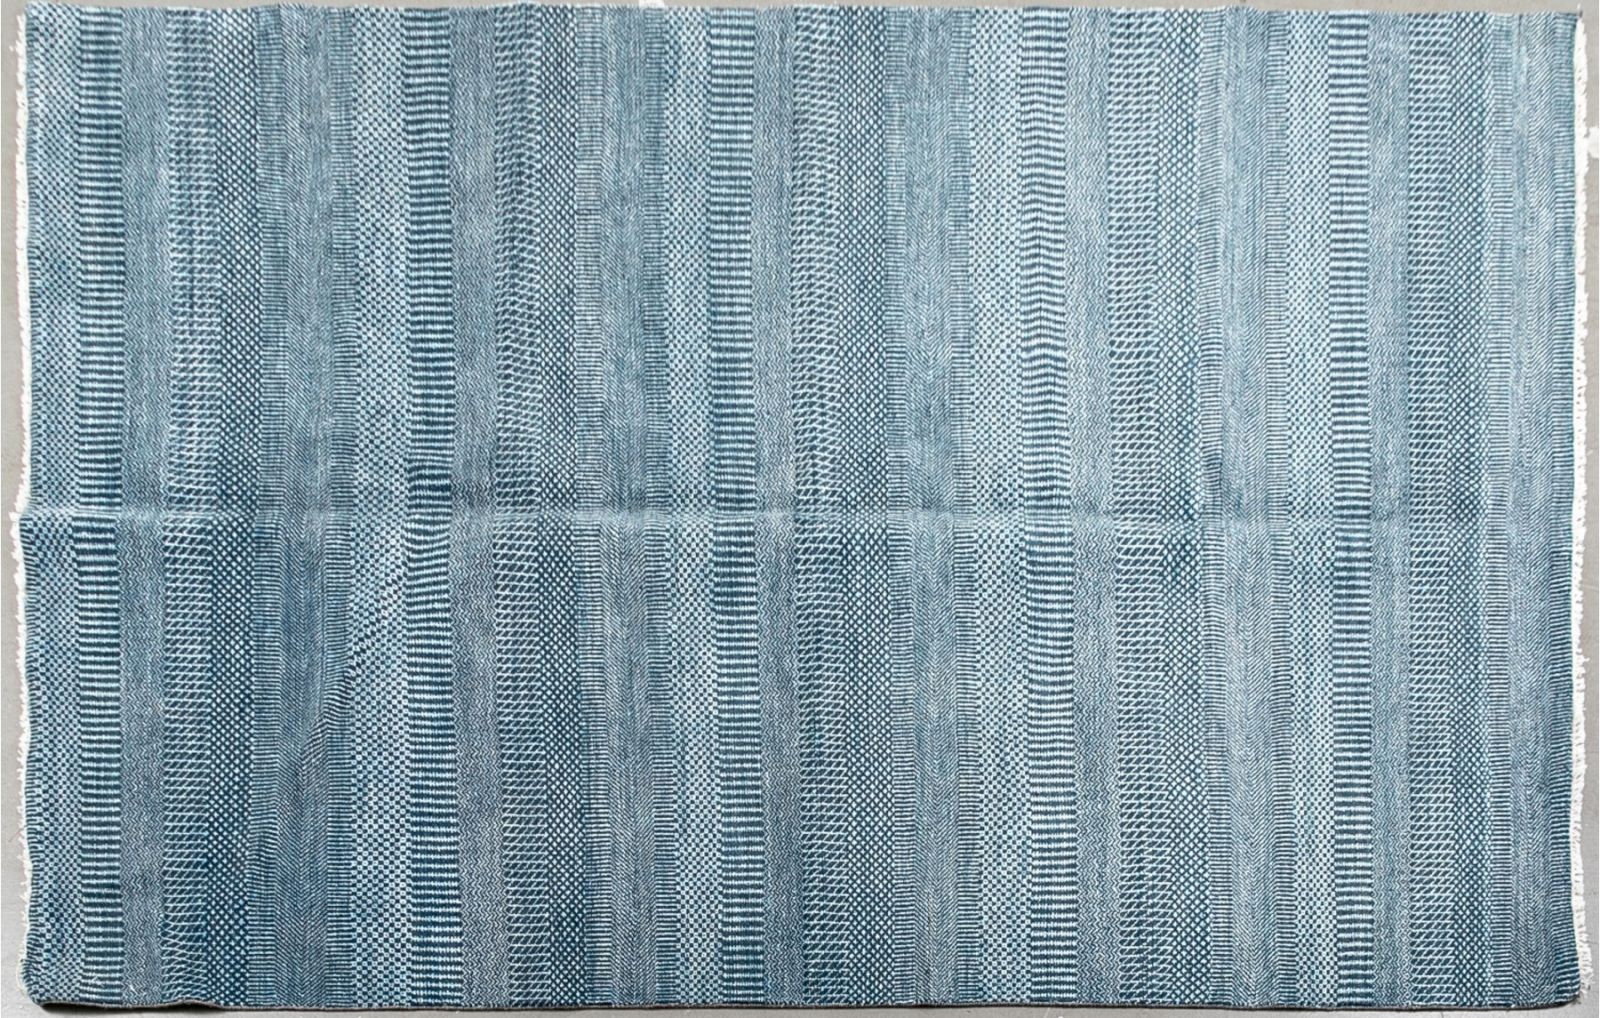 HAND-KNOTTED BLUE TONED WOOL AREA RUG, 6'1